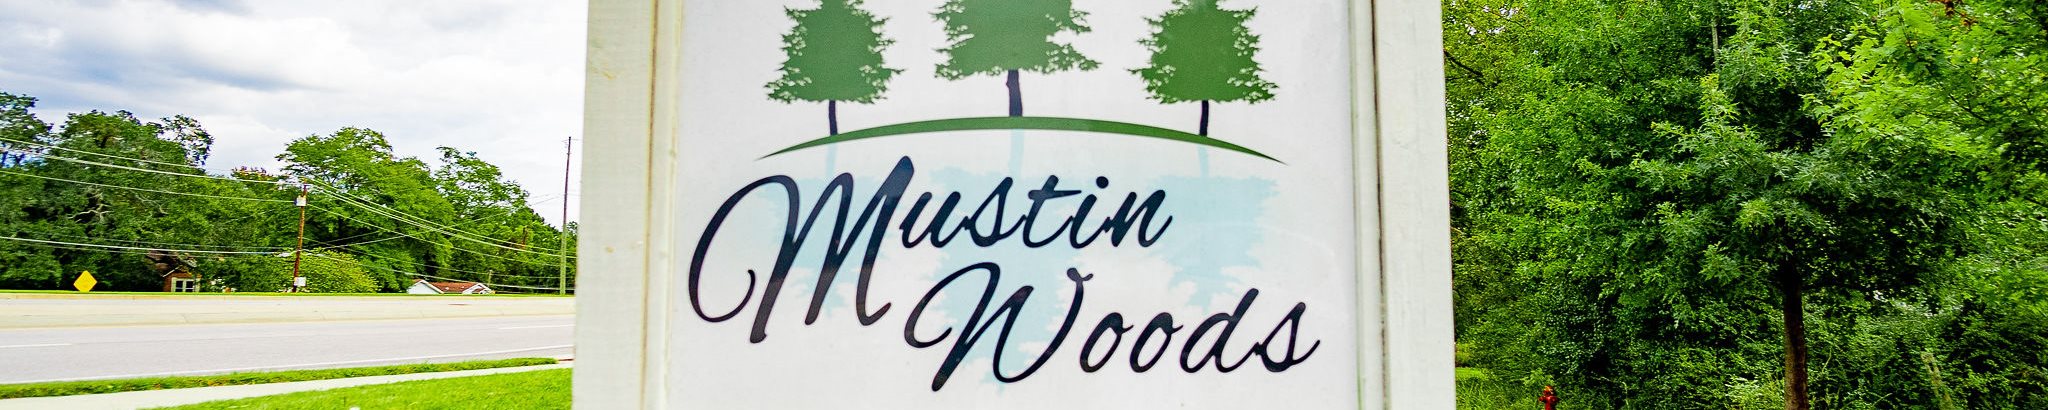 mustin woods apartment sign